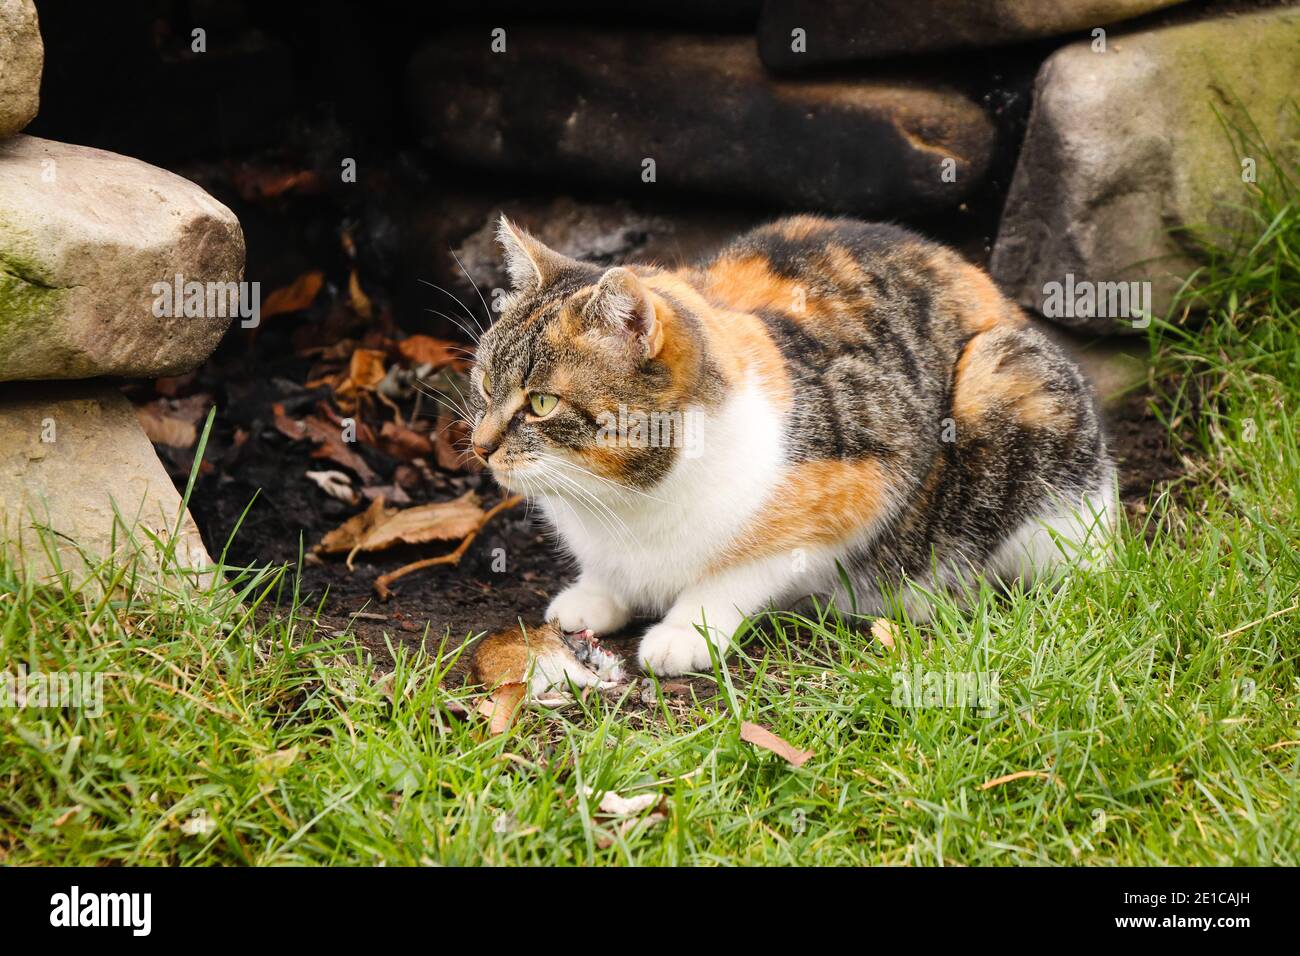 Glorious sight from the world's largest domestic predator, and a domestic cat. She has just caught her umpteenth mouse and is enjoying it. Stock Photo